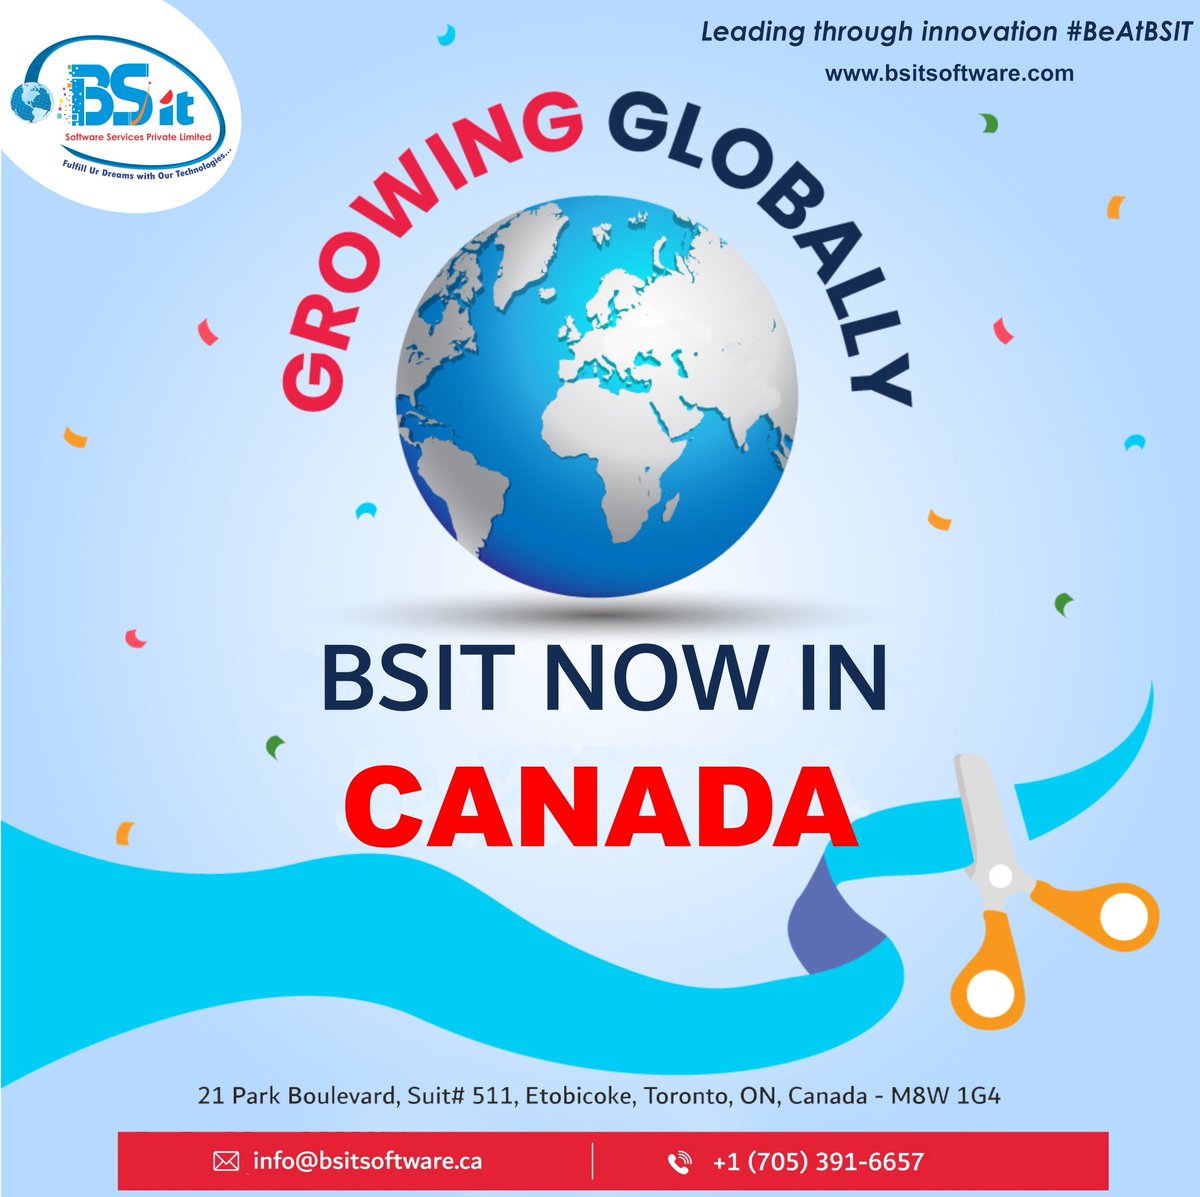 We @ BSIT Software Services
 expanding our footprint globally, to serve you better.

 We are delighted to announce our new branch office in #Canada.🇨🇦 Let’s innovate better.

#BeAtBSIT #BSIT #bsitsoftware #bsitsoftwareservices #DigitalTransformation #ITCompany #MobileApp